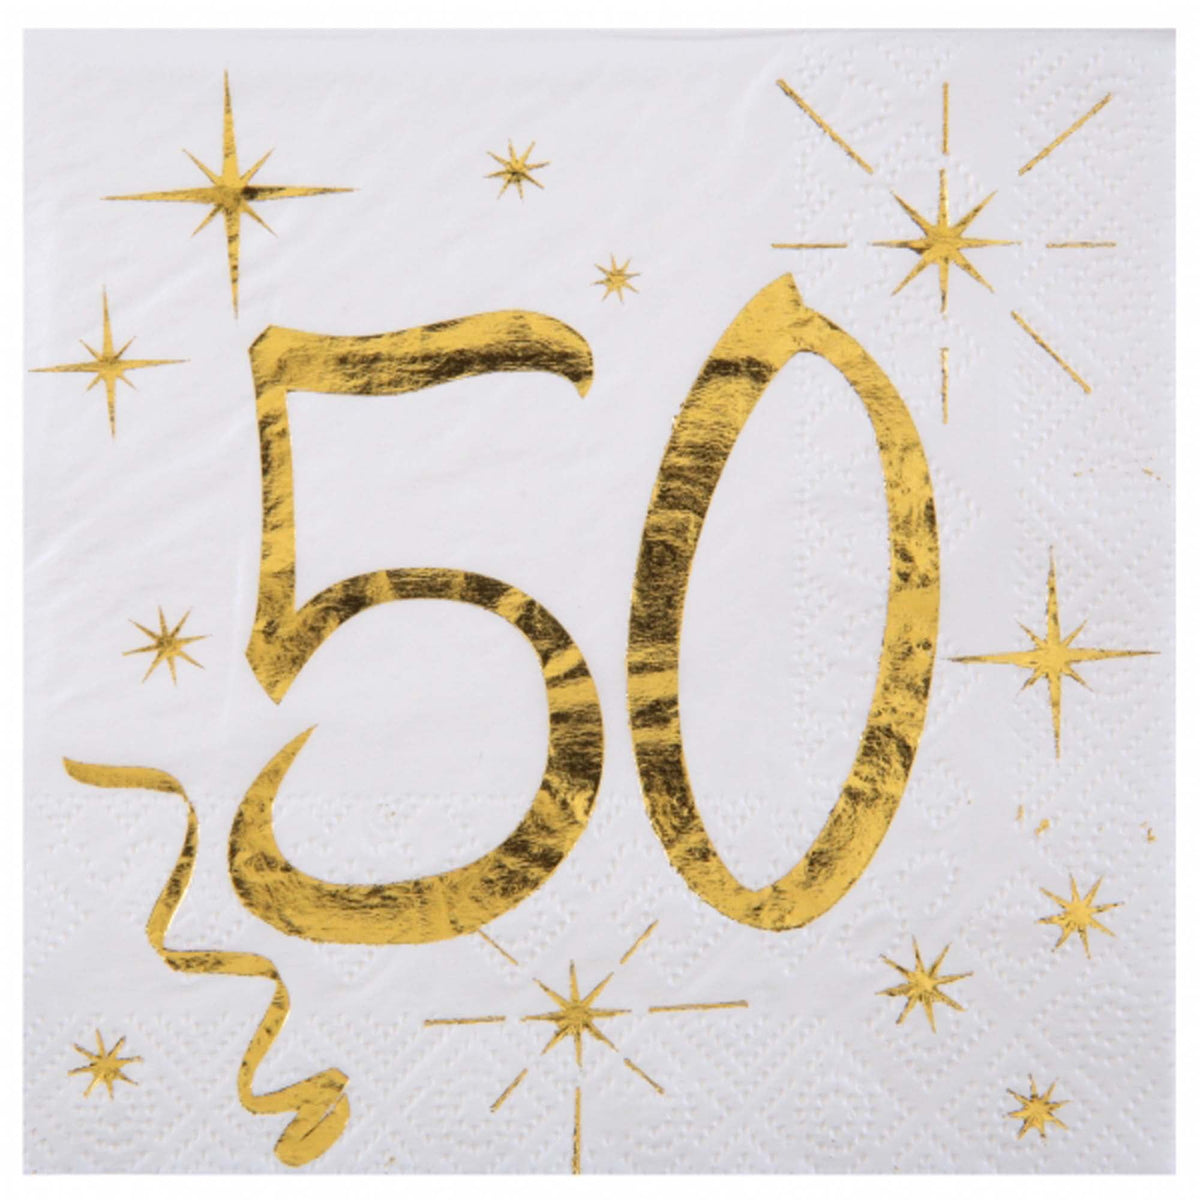 SANTEX General Birthday Starry Golden Age 50th Birthday Large Lunch Napkins, 20 Count 3660380040651